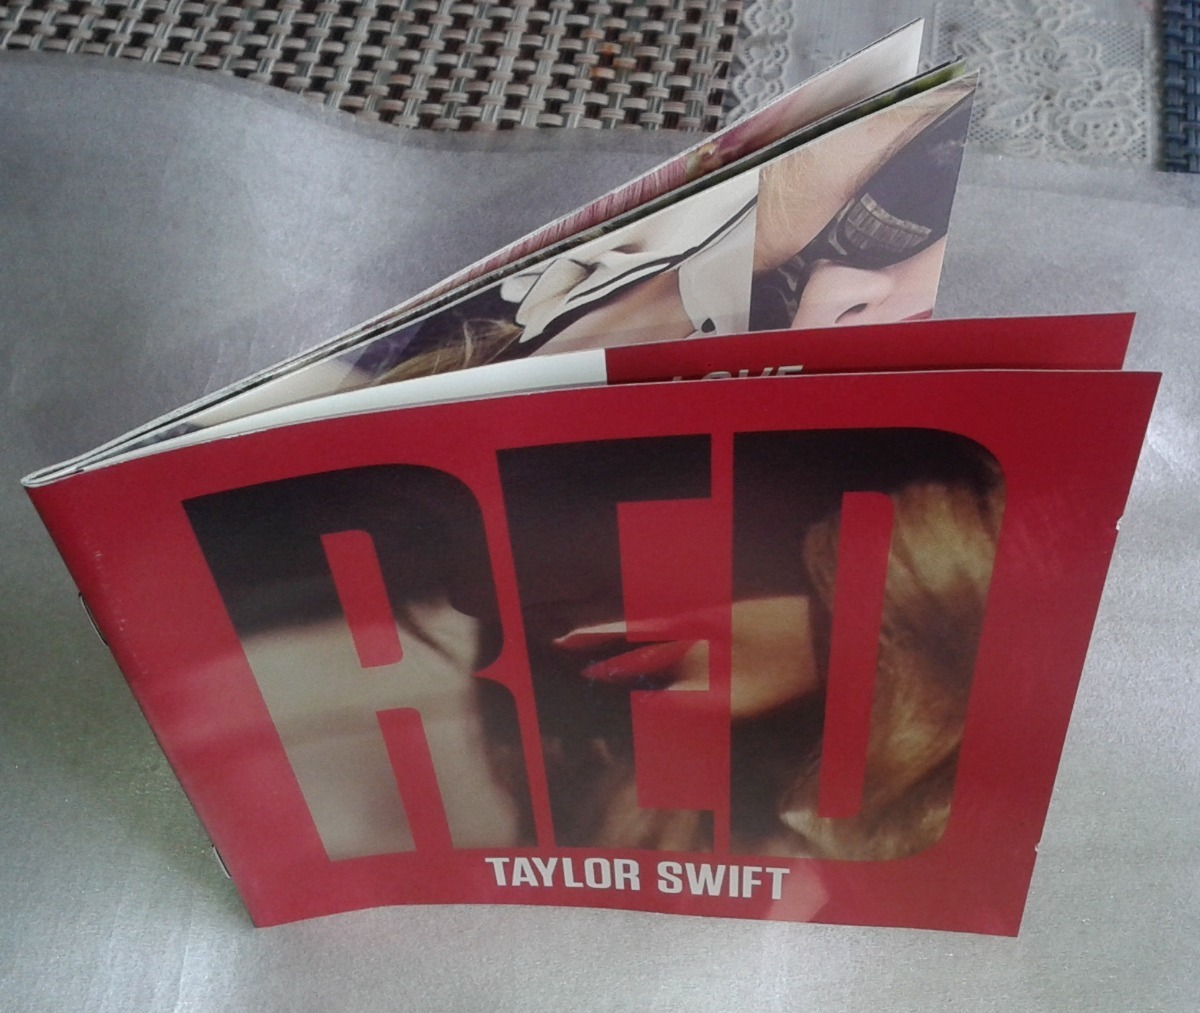 Taylor Swift Red Deluxe Edition 2 Cds Made In Mexico 2012 249900